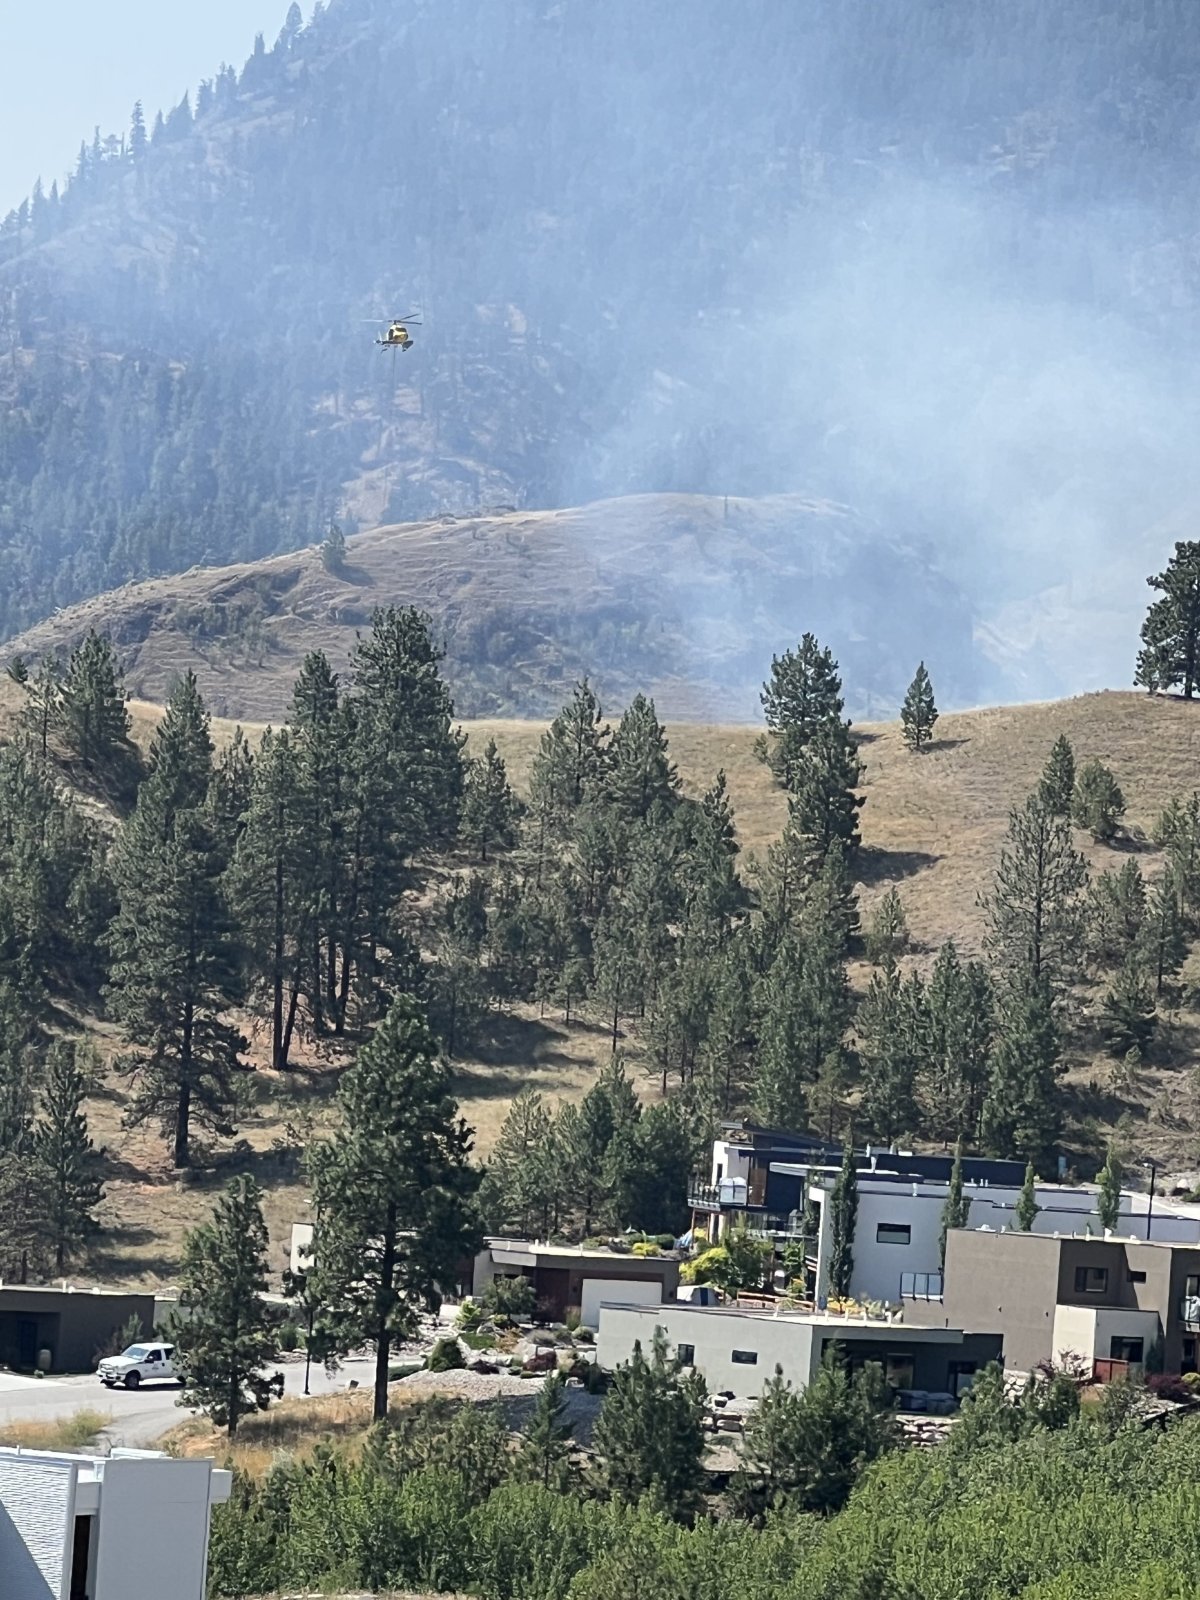 According to the BC Wildfire Service, the fire was spotted at around 10:30 a.m. Friday, and is located at Skaha Creek.